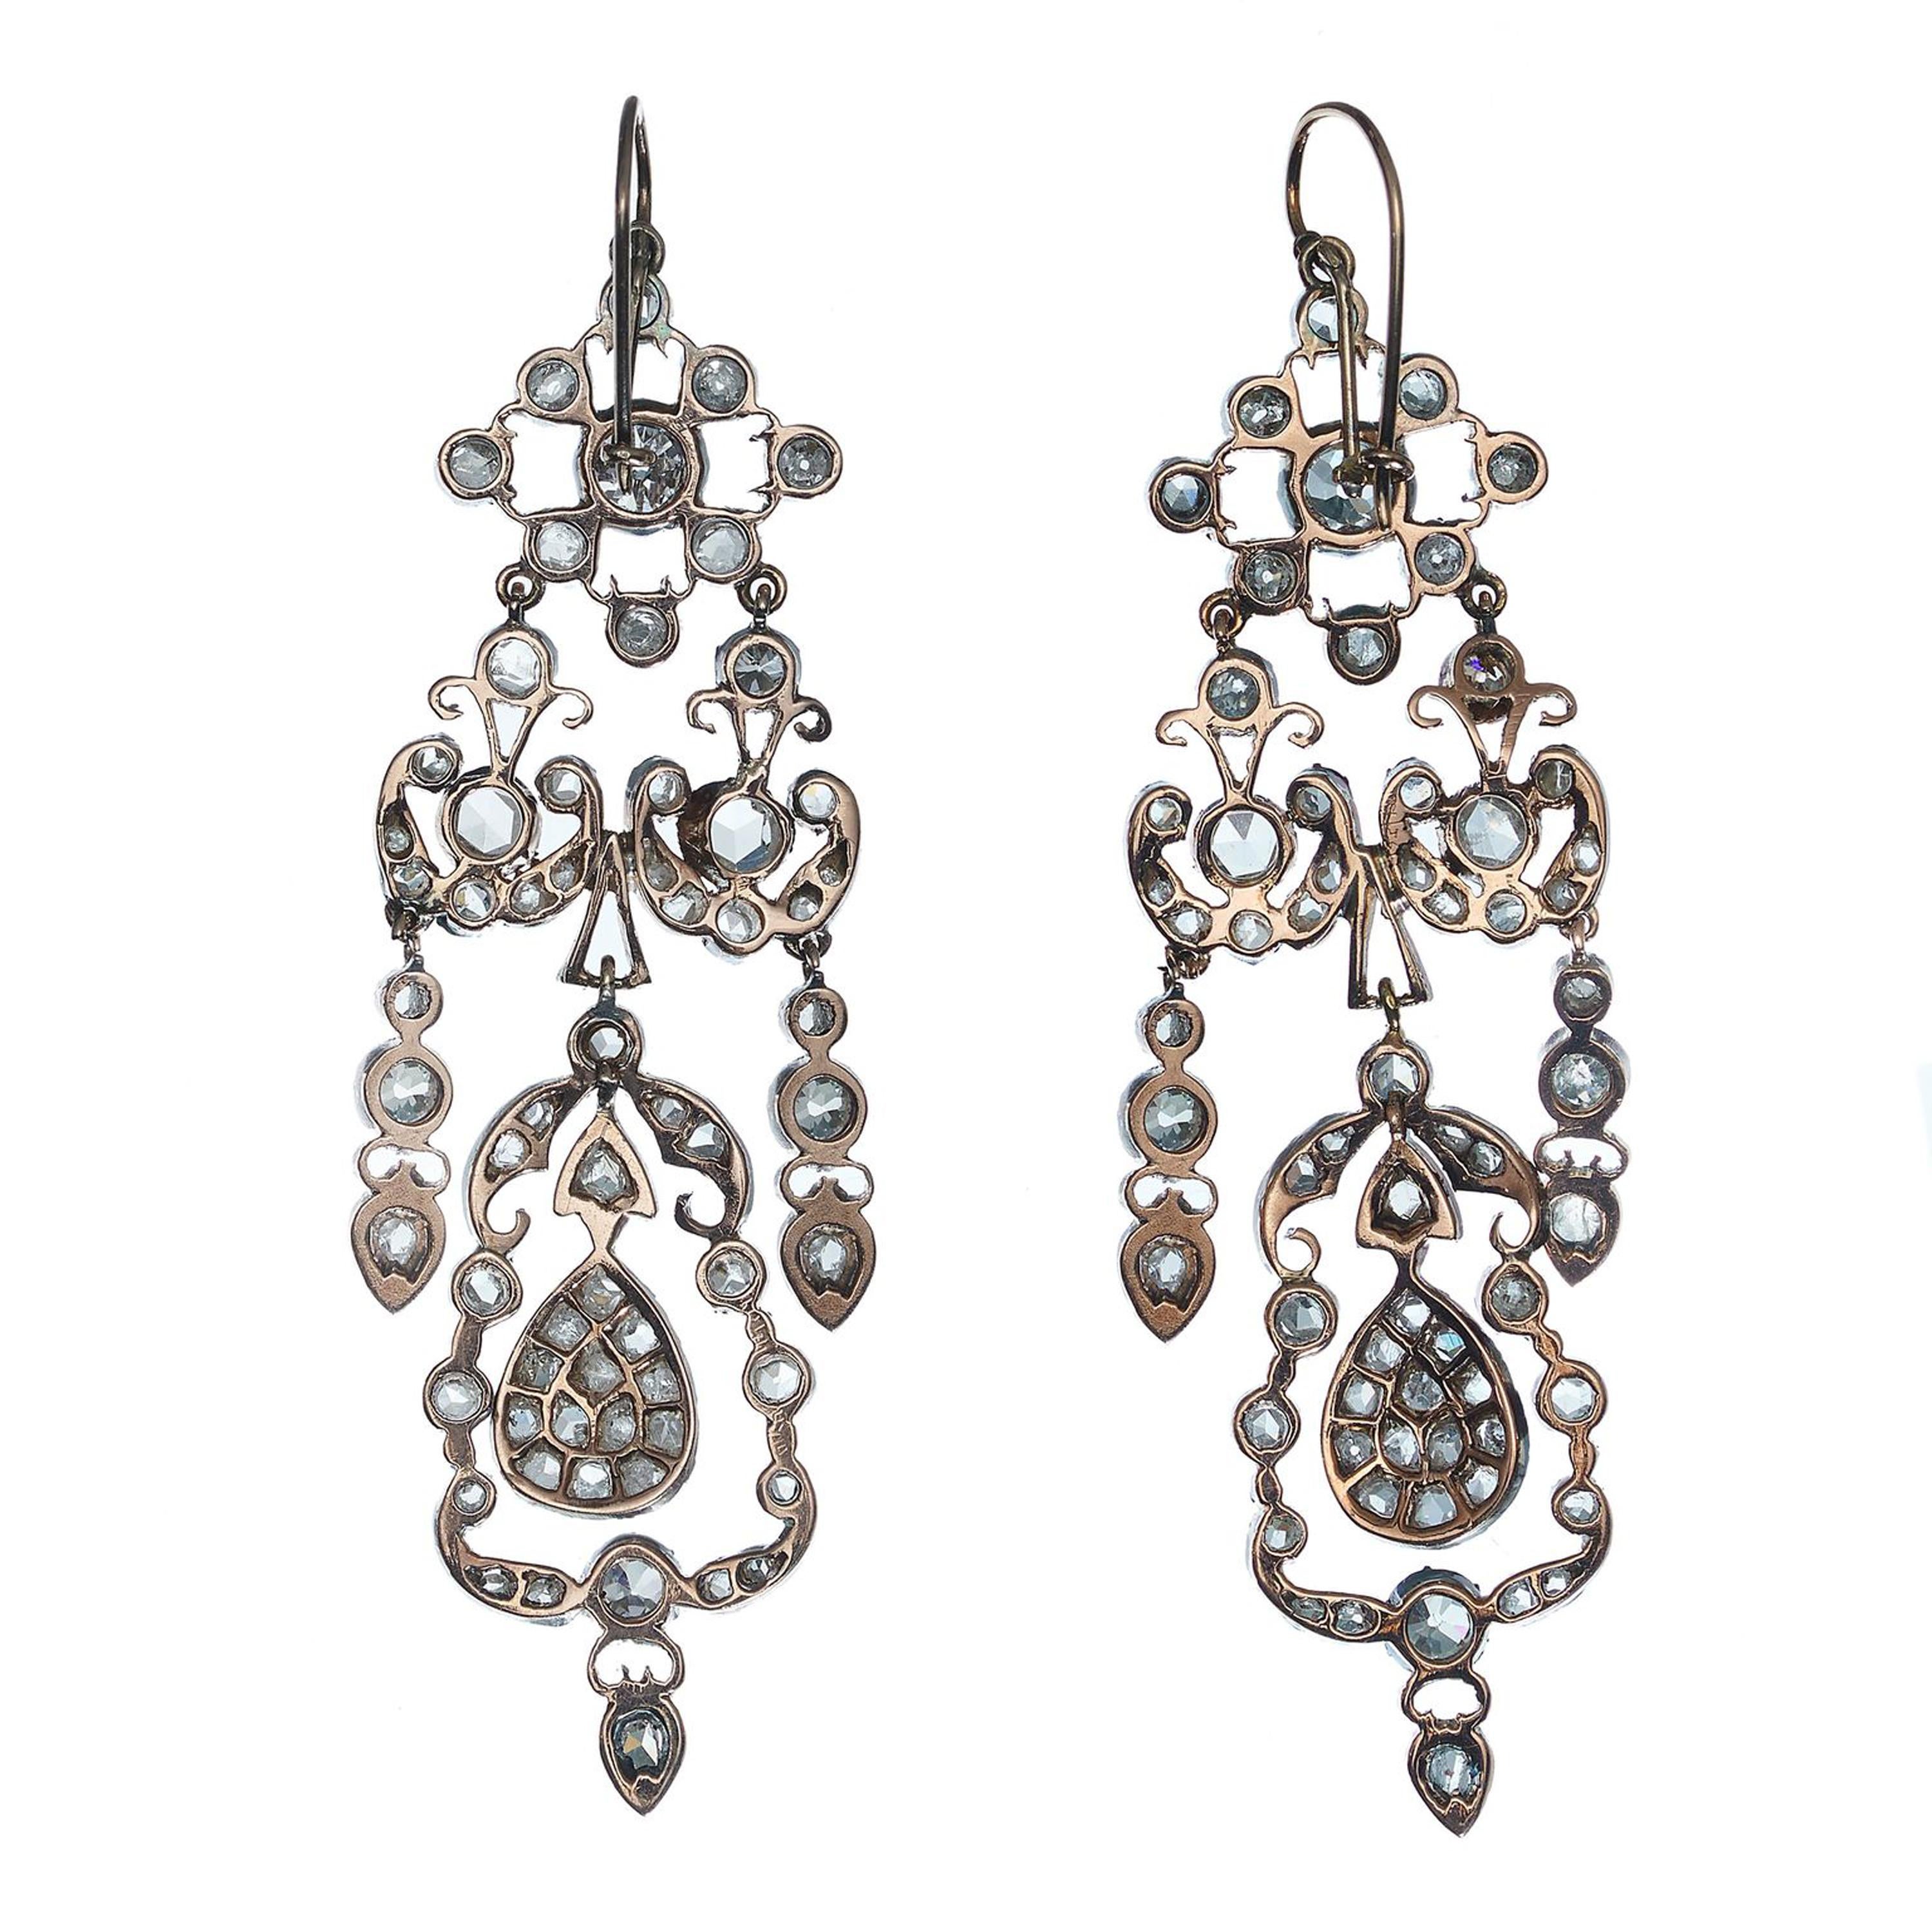 A pair of antique style, diamond set, drop-shape earrings, with a lattice cluster at the top, with an old-cut diamond in the centre, with surrounding rose-cut diamonds and old mine-cut diamonds, set upside down, with a double garland below, set with